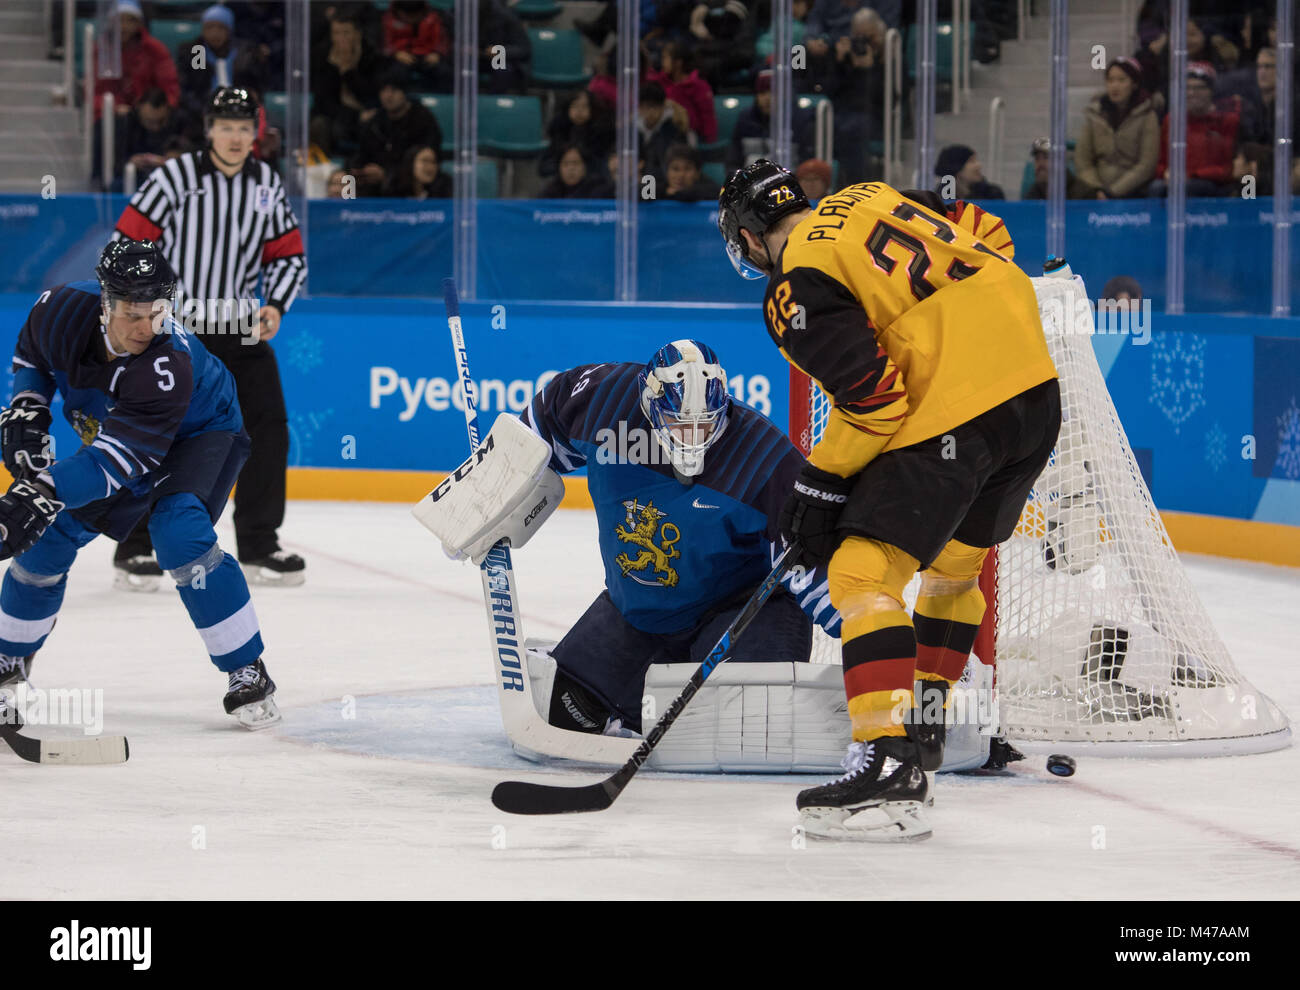 Gangneung, South Korea. 14th Feb, 2018. Finland goalkeeper MIKKO KOSKINEN makes a save against MATTHIAS PLACHTA of Germany during Ice Hockey: Men's Preliminary Round - Group C at Gangneung Hockey Centre during the 2018 Pyeongchang Winter Olympic Games. Credit: Mark Avery/ZUMA Wire/Alamy Live News Stock Photo